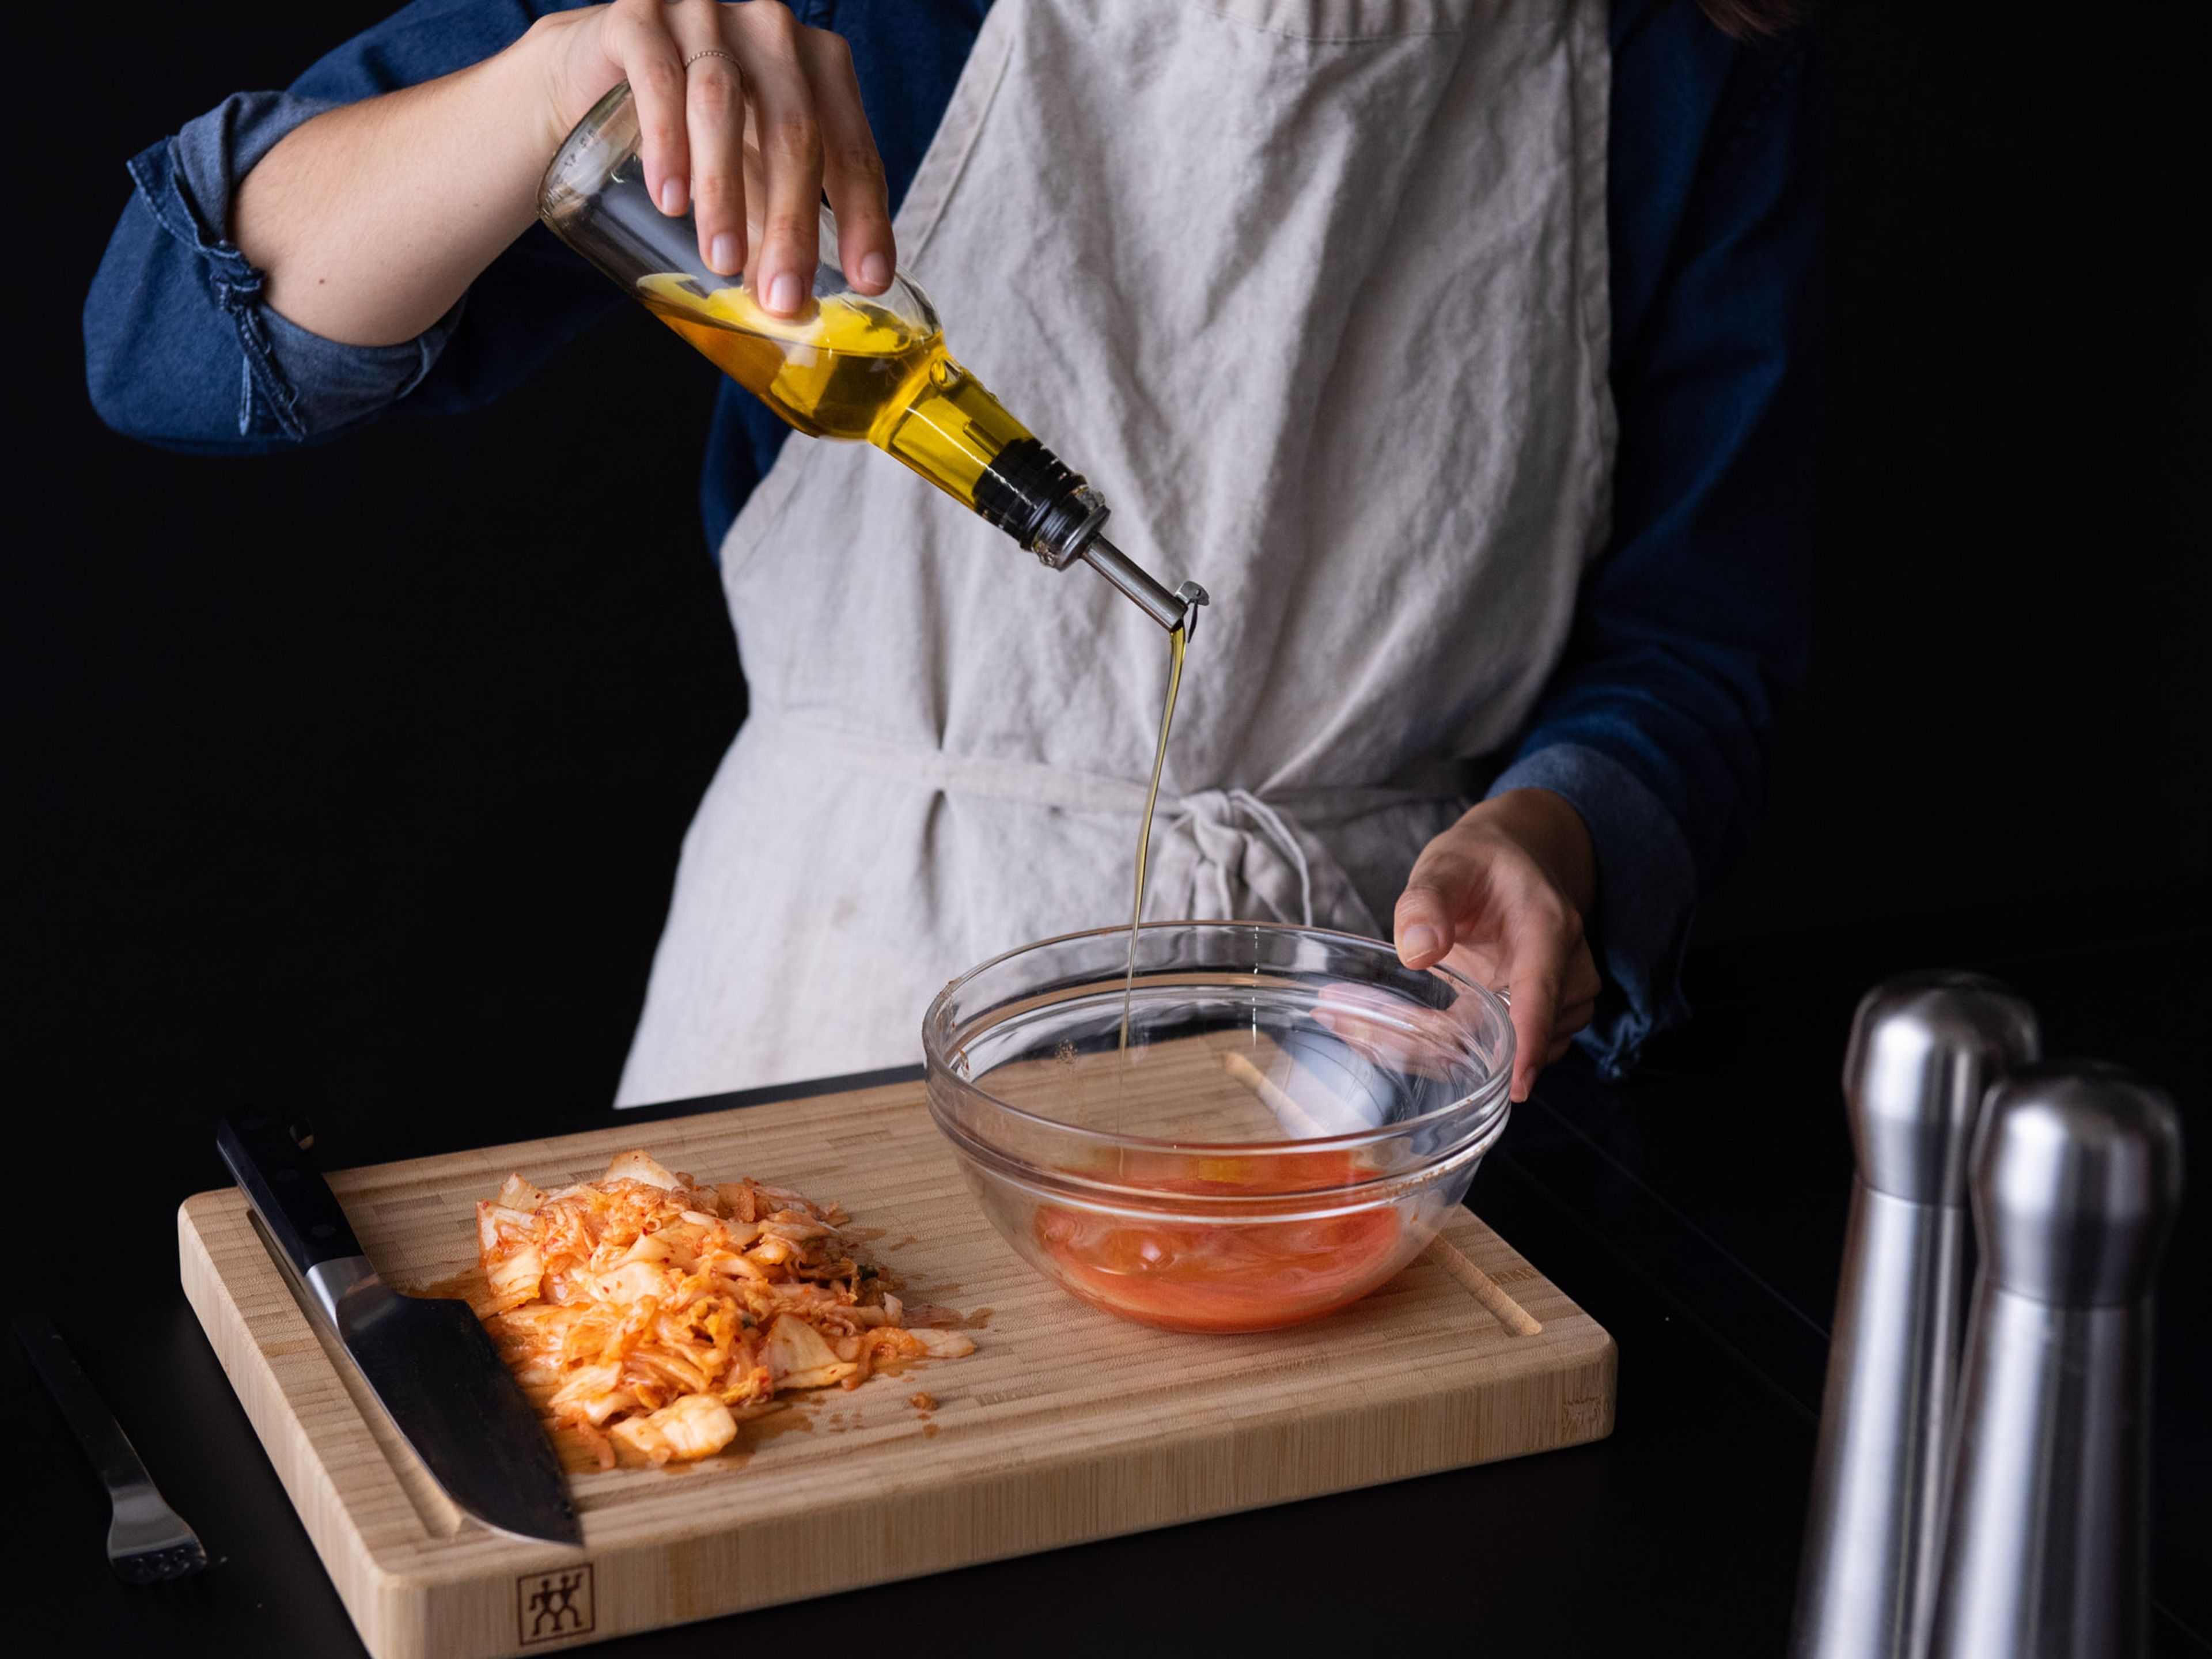 Set the kimchi in a fine sieve over a bowl and press to remove excess liquid, then roughly chop. Whisk the kimchi juice with rice vinegar and olive oil to make the salad dressing. Season to taste with salt and pepper and set aside.